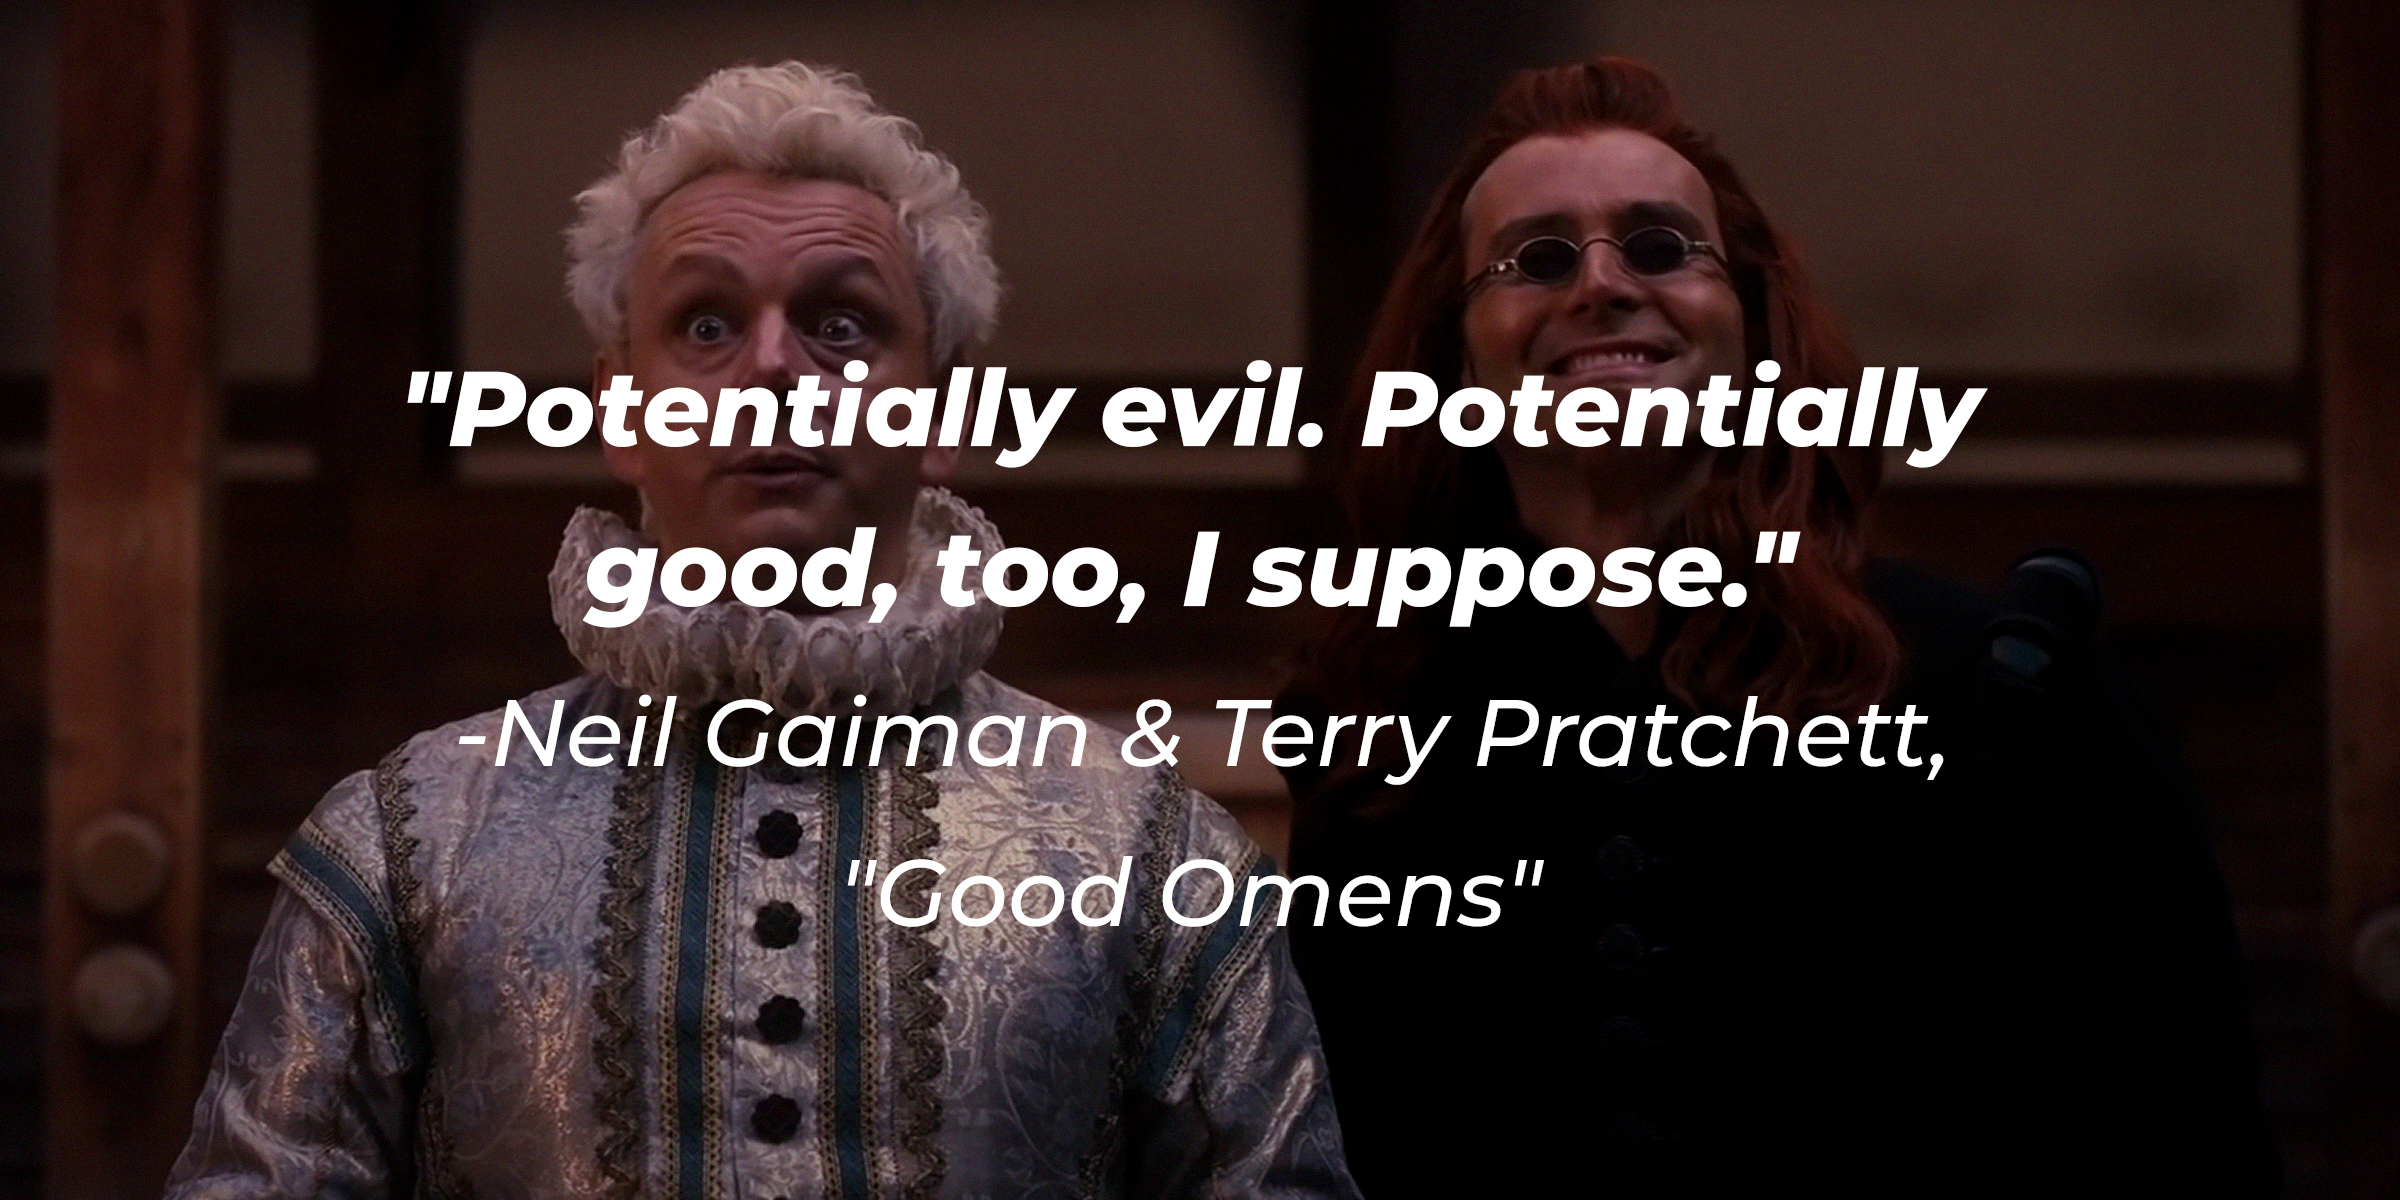 A photo of Aziraphale and Crowley in "Good Omens" with Neil Gaiman and Terry Pratchett's quote: "Potentially evil. Potentially good, too, I suppose." | Source: youtube.com/PrimeVideoUK